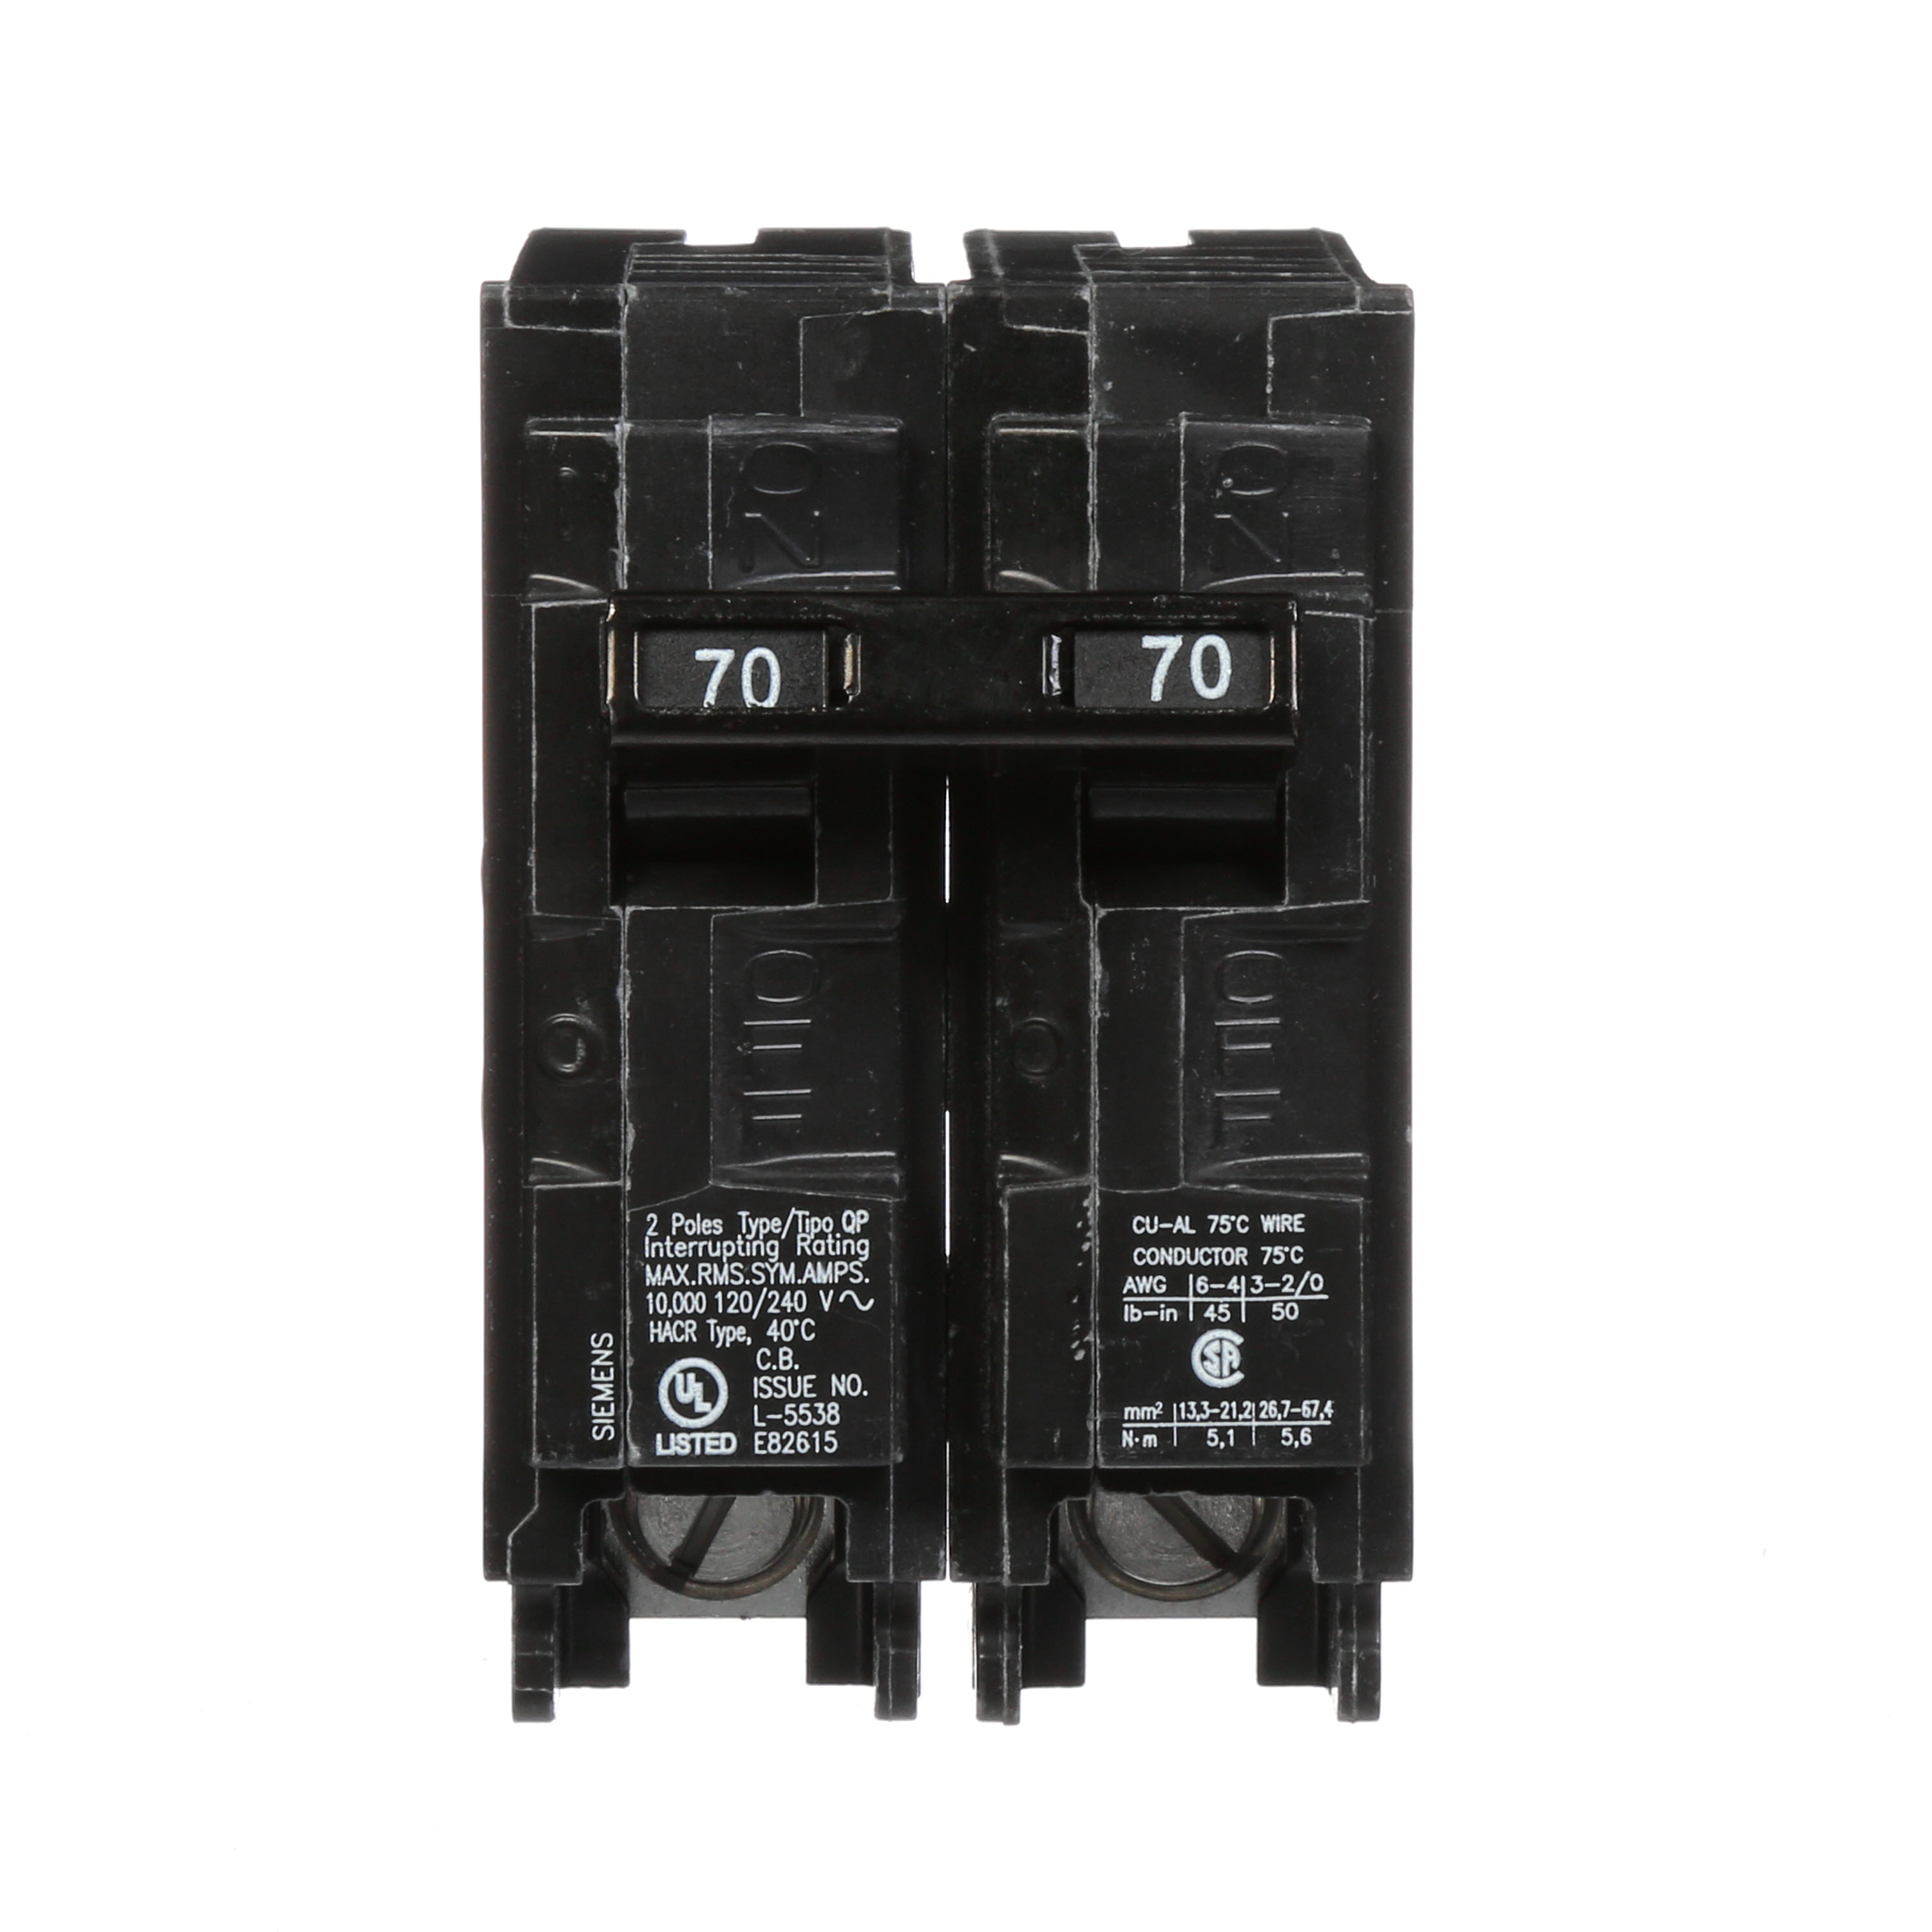 Siemens Low Voltage Residential Circuit Breakers Miniature Thermal Mag Circuit Breakers - Type QP/MP, 2-Pole, 120/240VAC are Circuit Protection Load Center Mains, Feeders, and Miniature Circuit Breakers. Type QP/MP Application Electrical Distribution Standard UL 489 Voltage Rating 120/240V Amperage Rating 70A Trip Range Thermal Magnetic Interrupt Rating 10 AIC Number Of Poles 2P